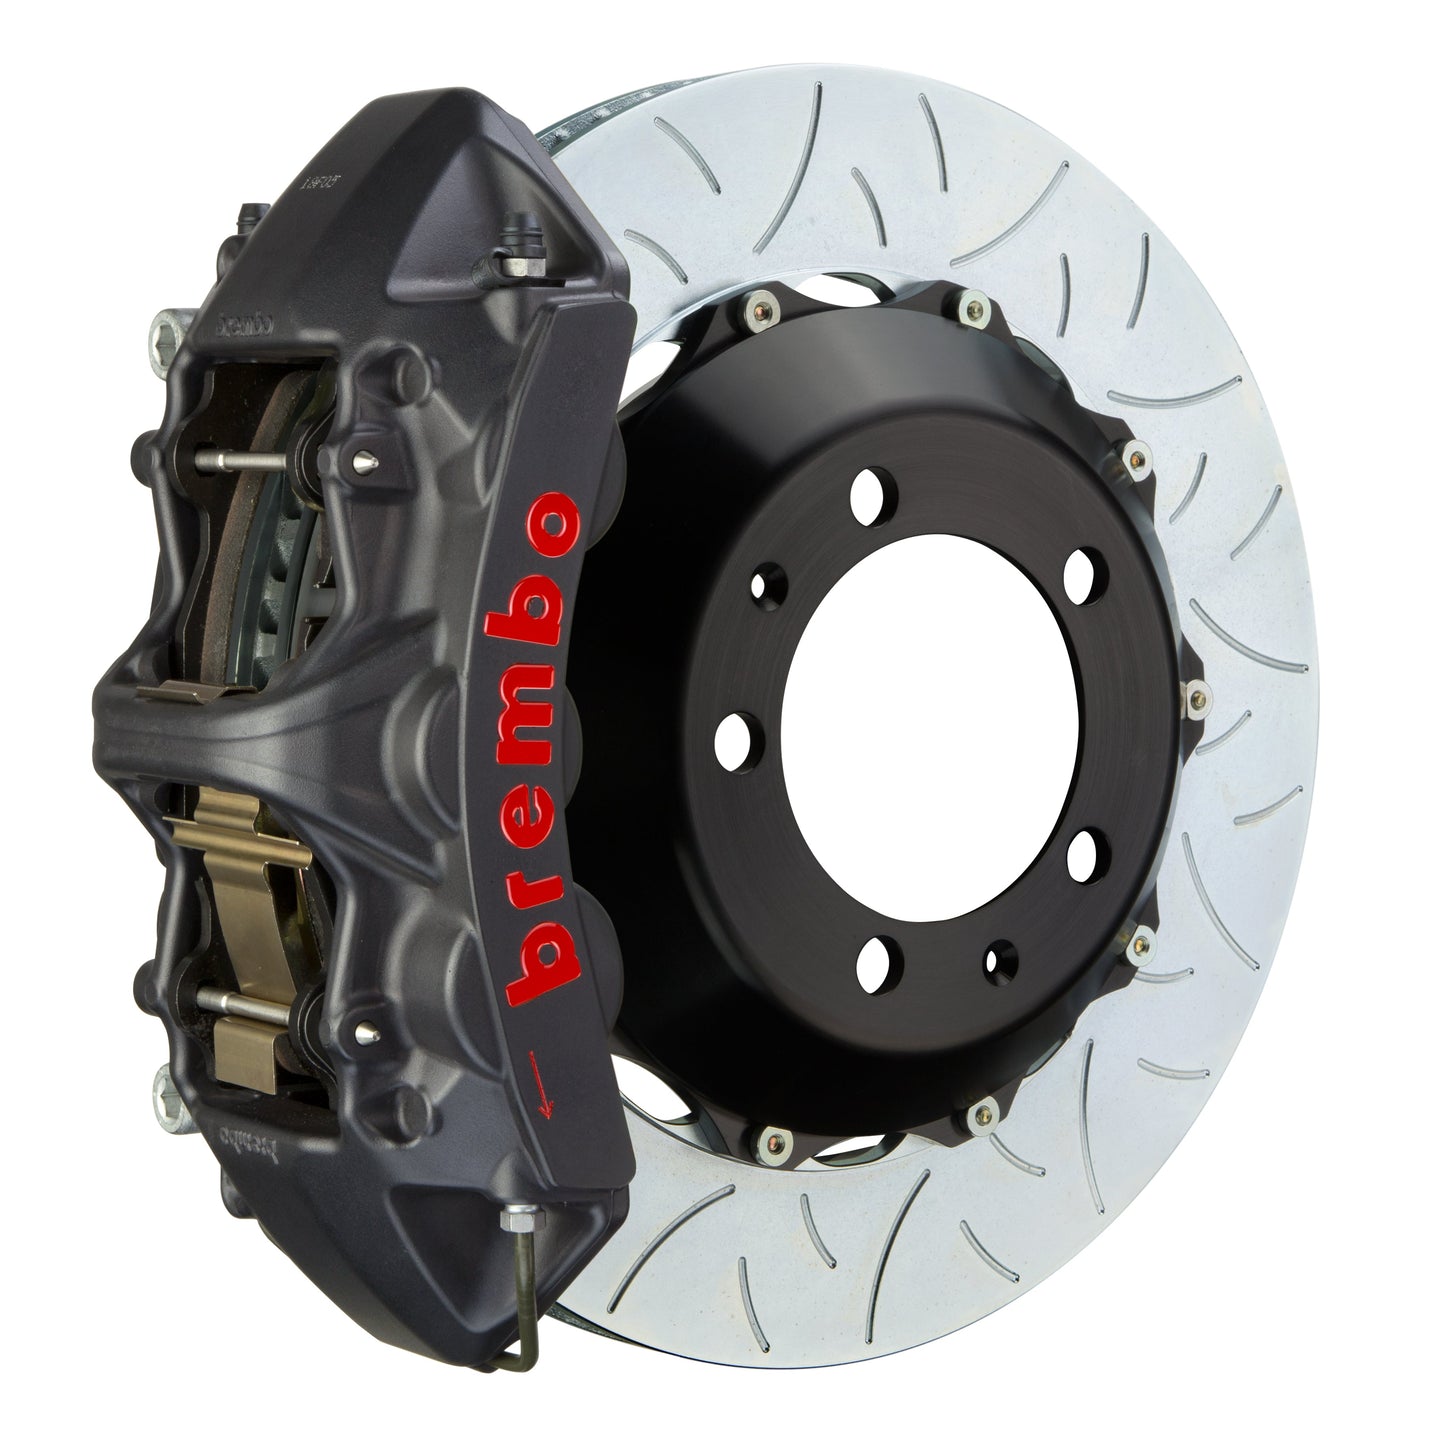 Front Brembo Gran Turismo Braking Upgrade Kit (1M19042AS) GT / S6 Caliper with 6-Pistons & 2-piece 380x32 Disc